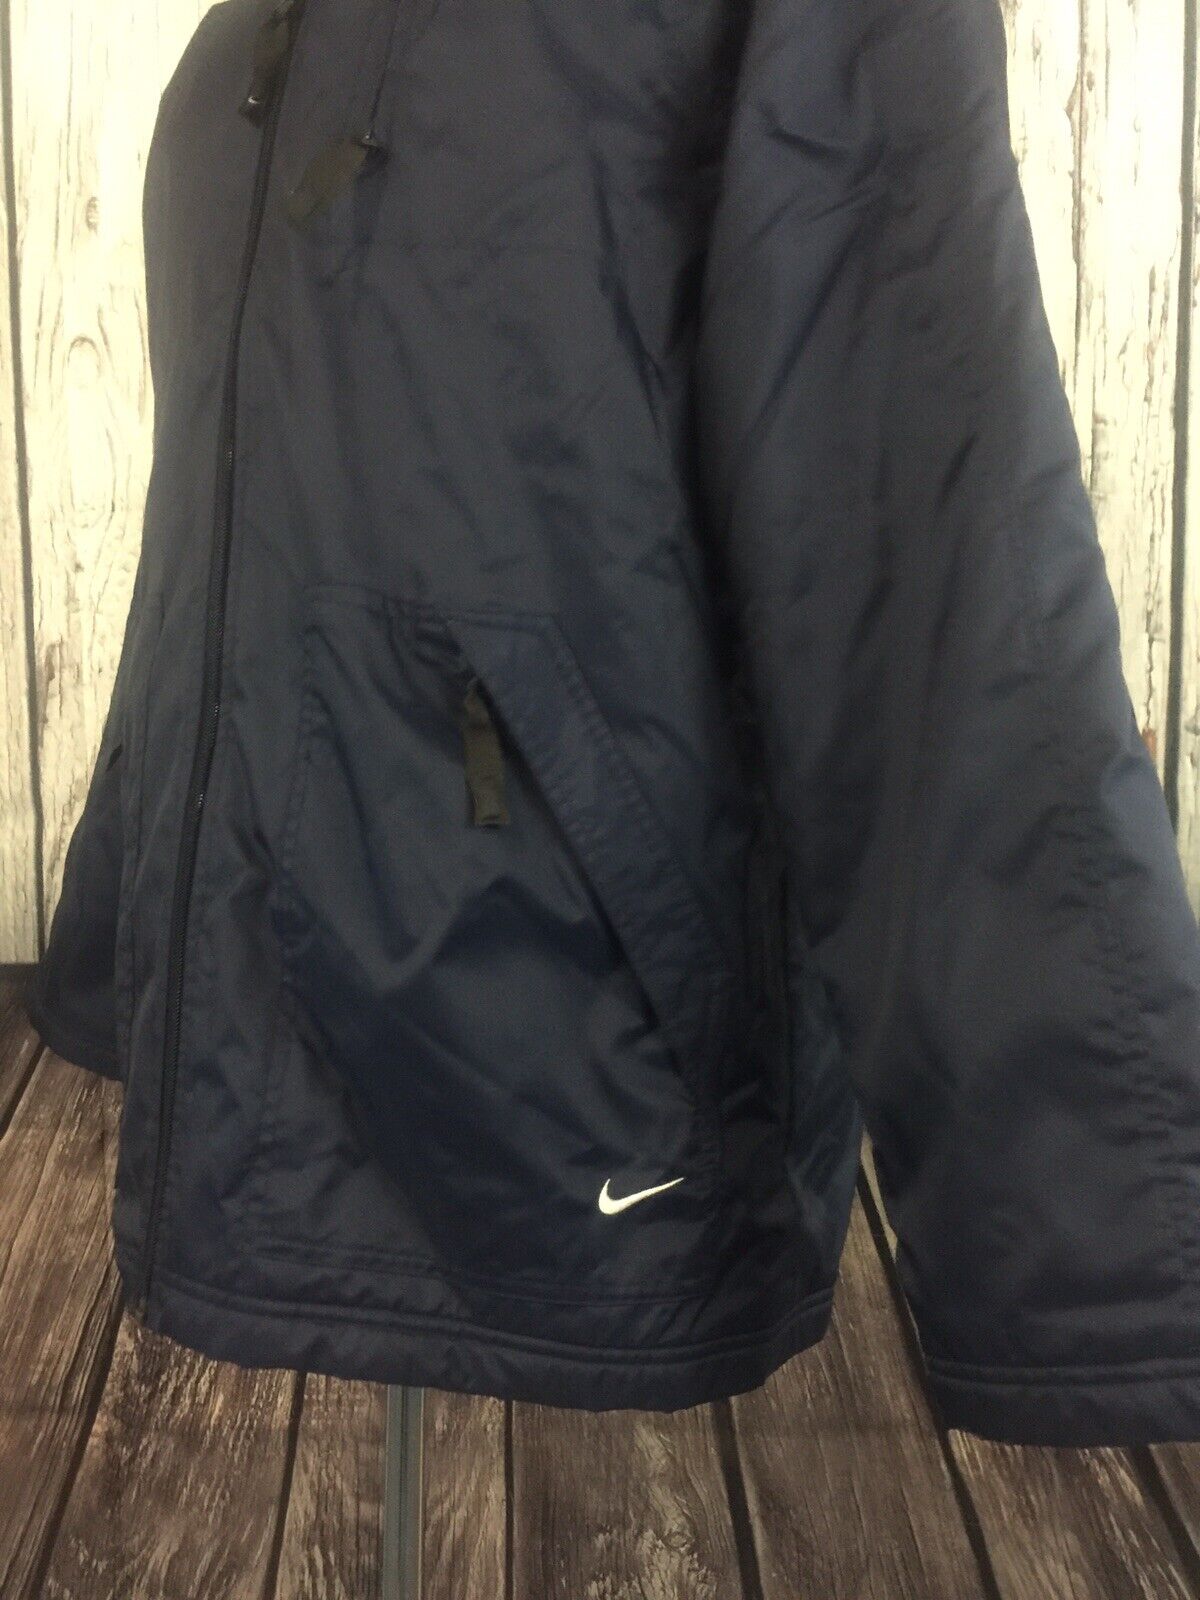 EXC COND NIKE MENS M SOFT FLEECE LINED NAVY BLUE … - image 5